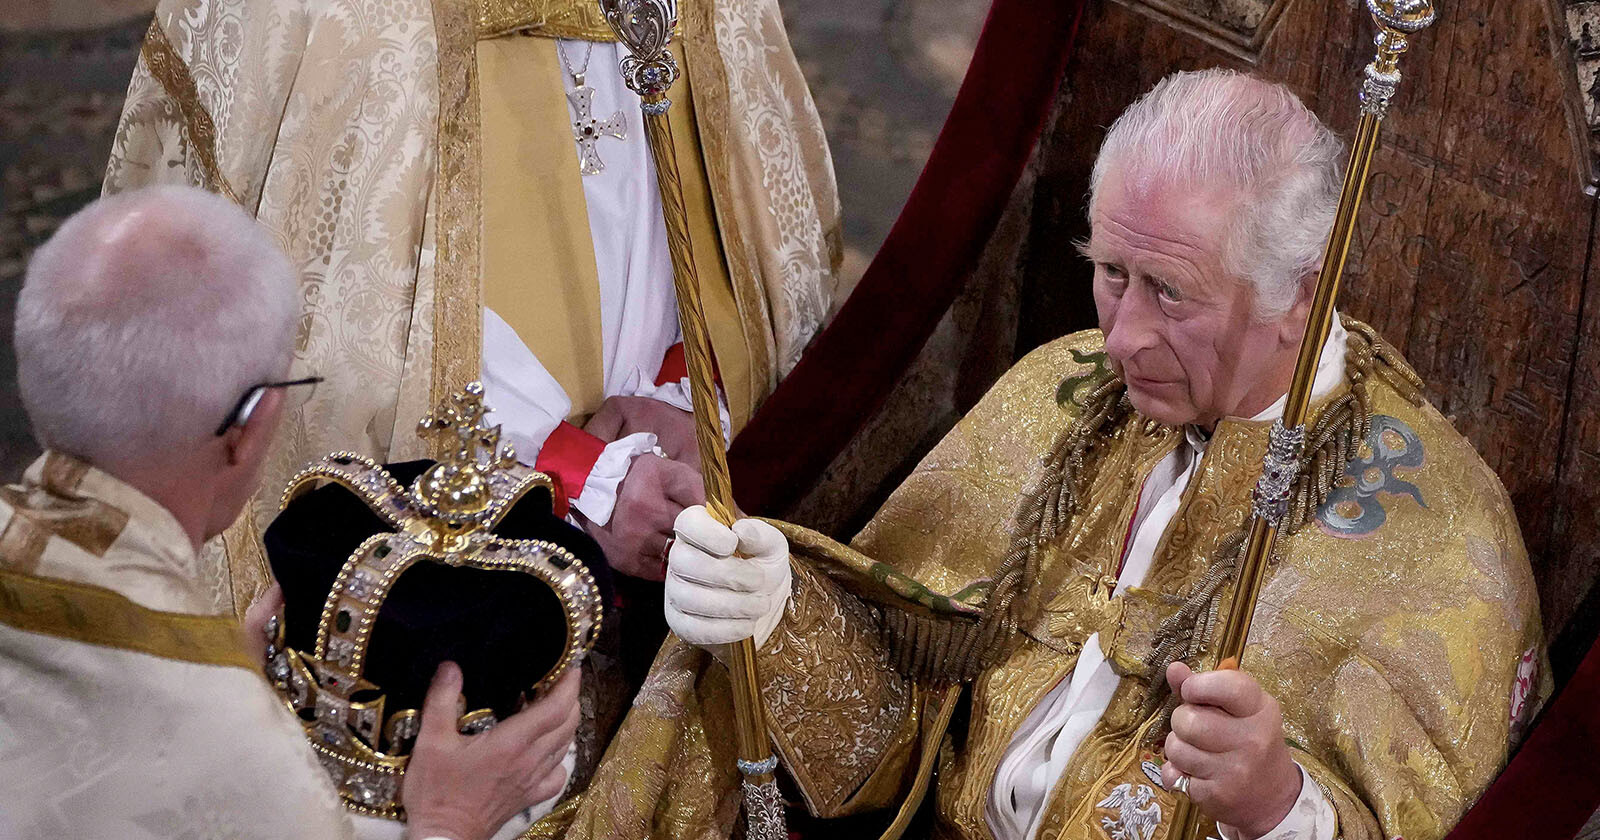 It Took 4 Photographers Operating 7 Cameras to Capture King Charles’s Coronation